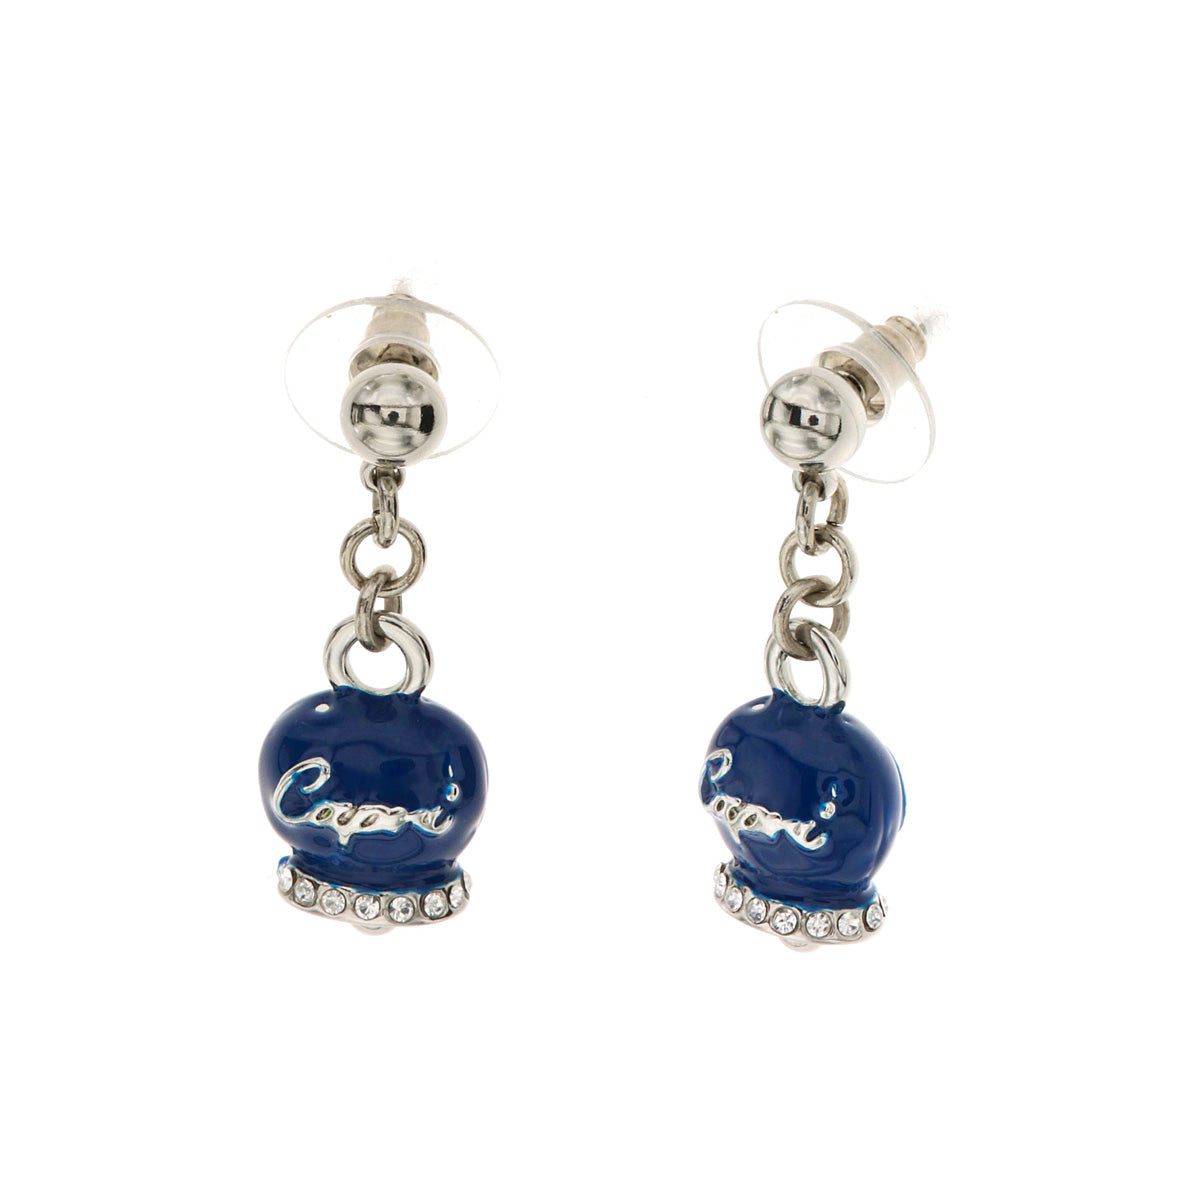 Metal earrings with bell Capri pending blue enamel, embellished with crystals